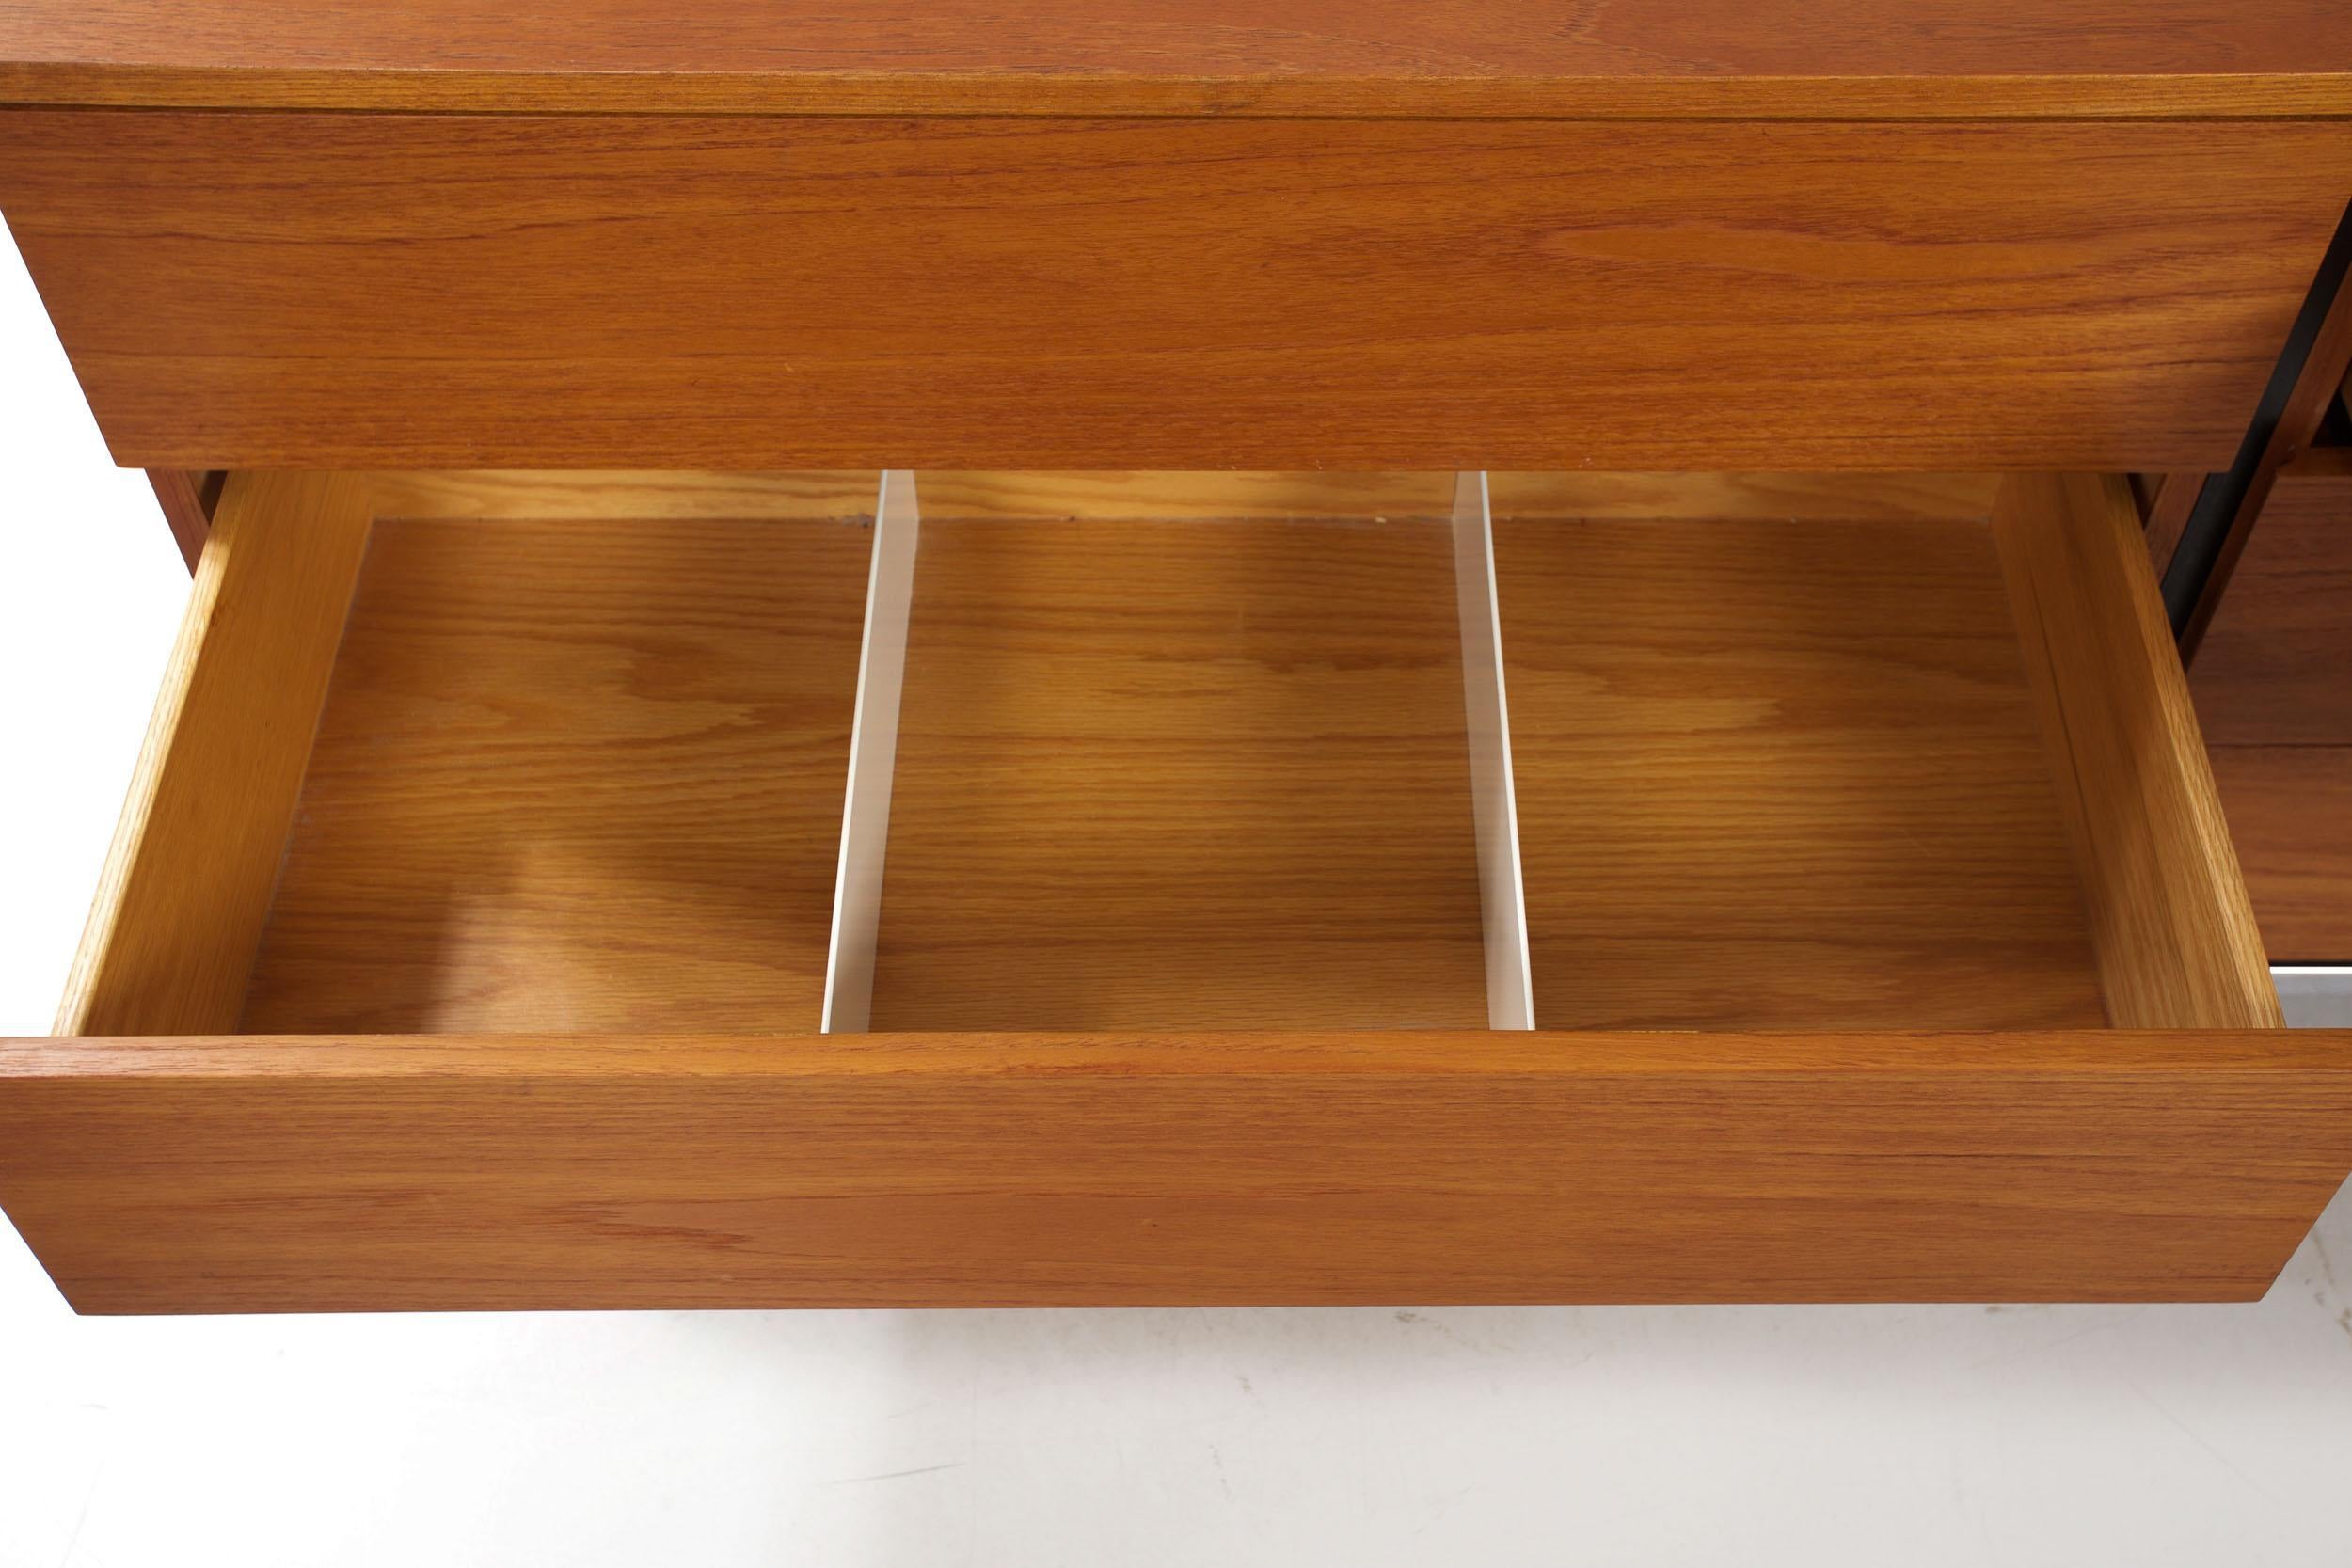 Knoll Mid-Century Modern Teak and Chrome Double Chest Credenza, circa 1970 For Sale 10